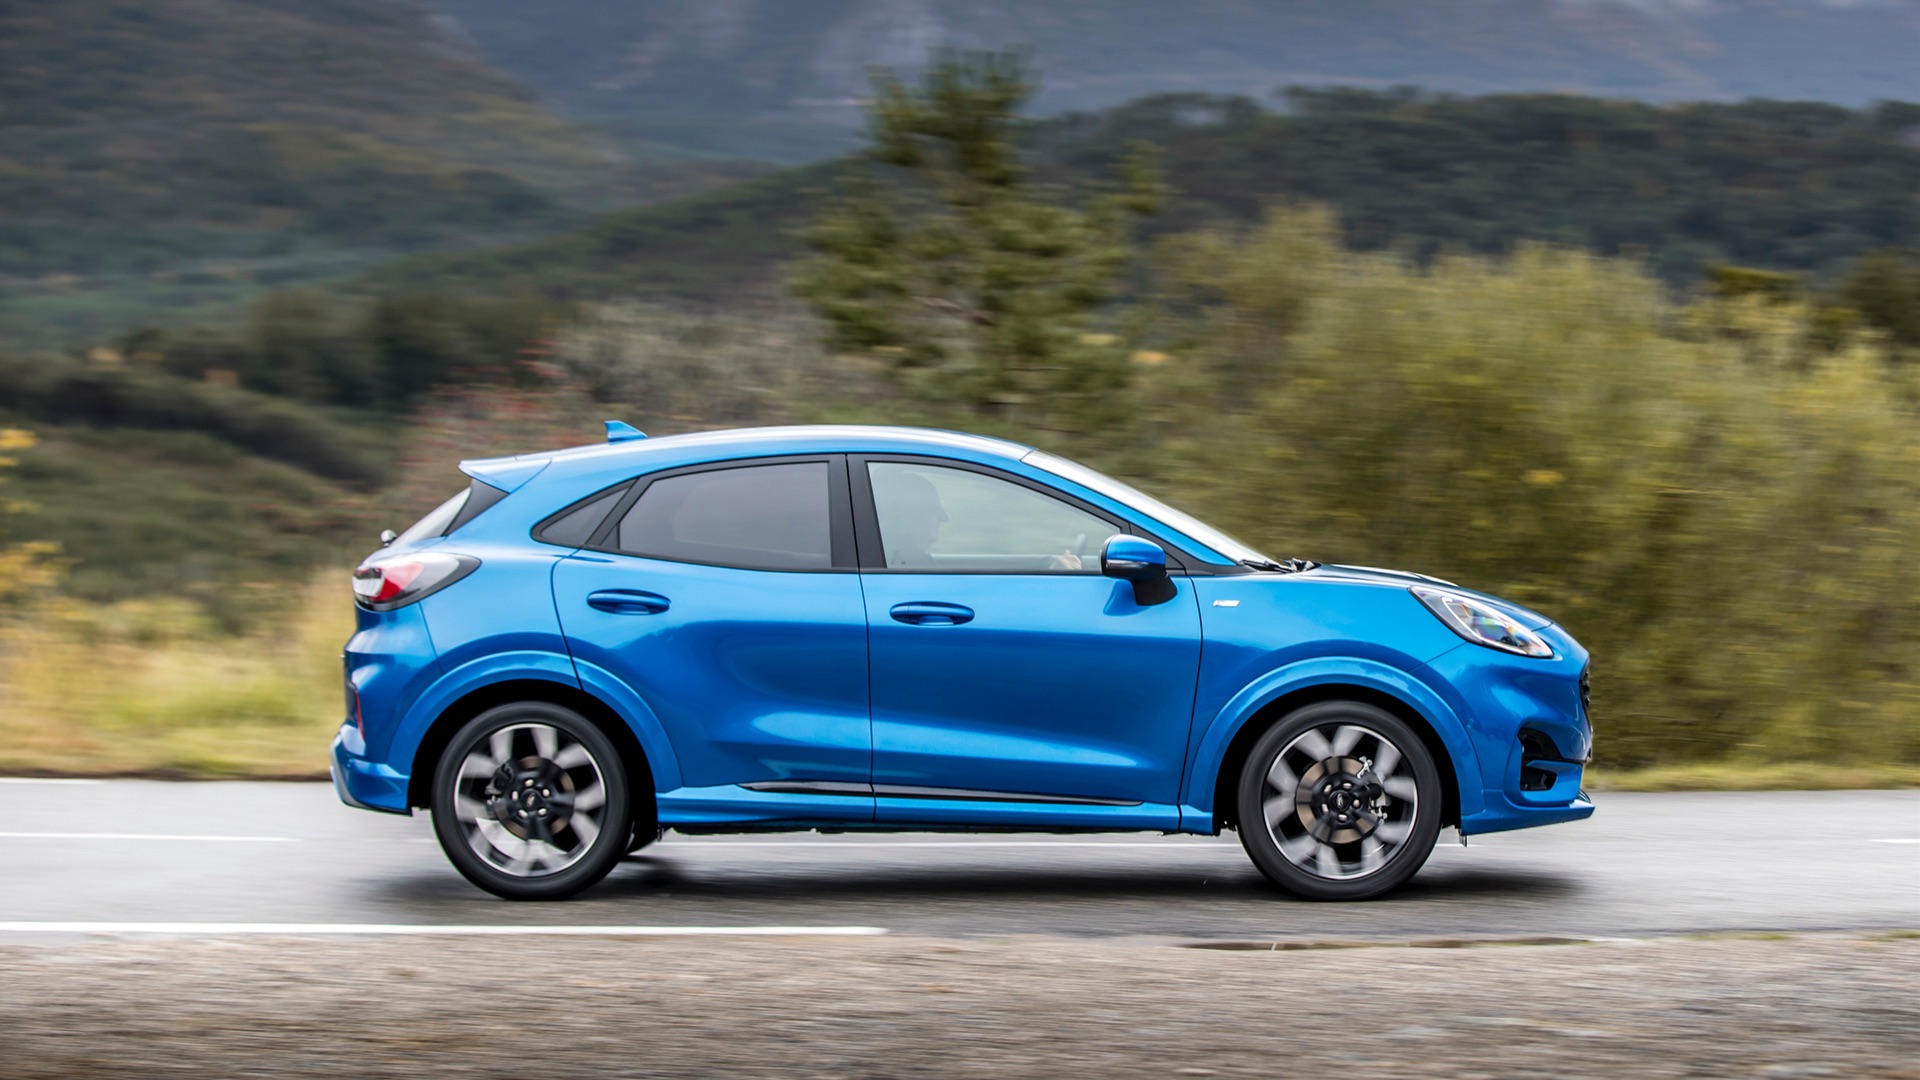 2020 Ford Puma review: top of the crossover class | Motoring Research